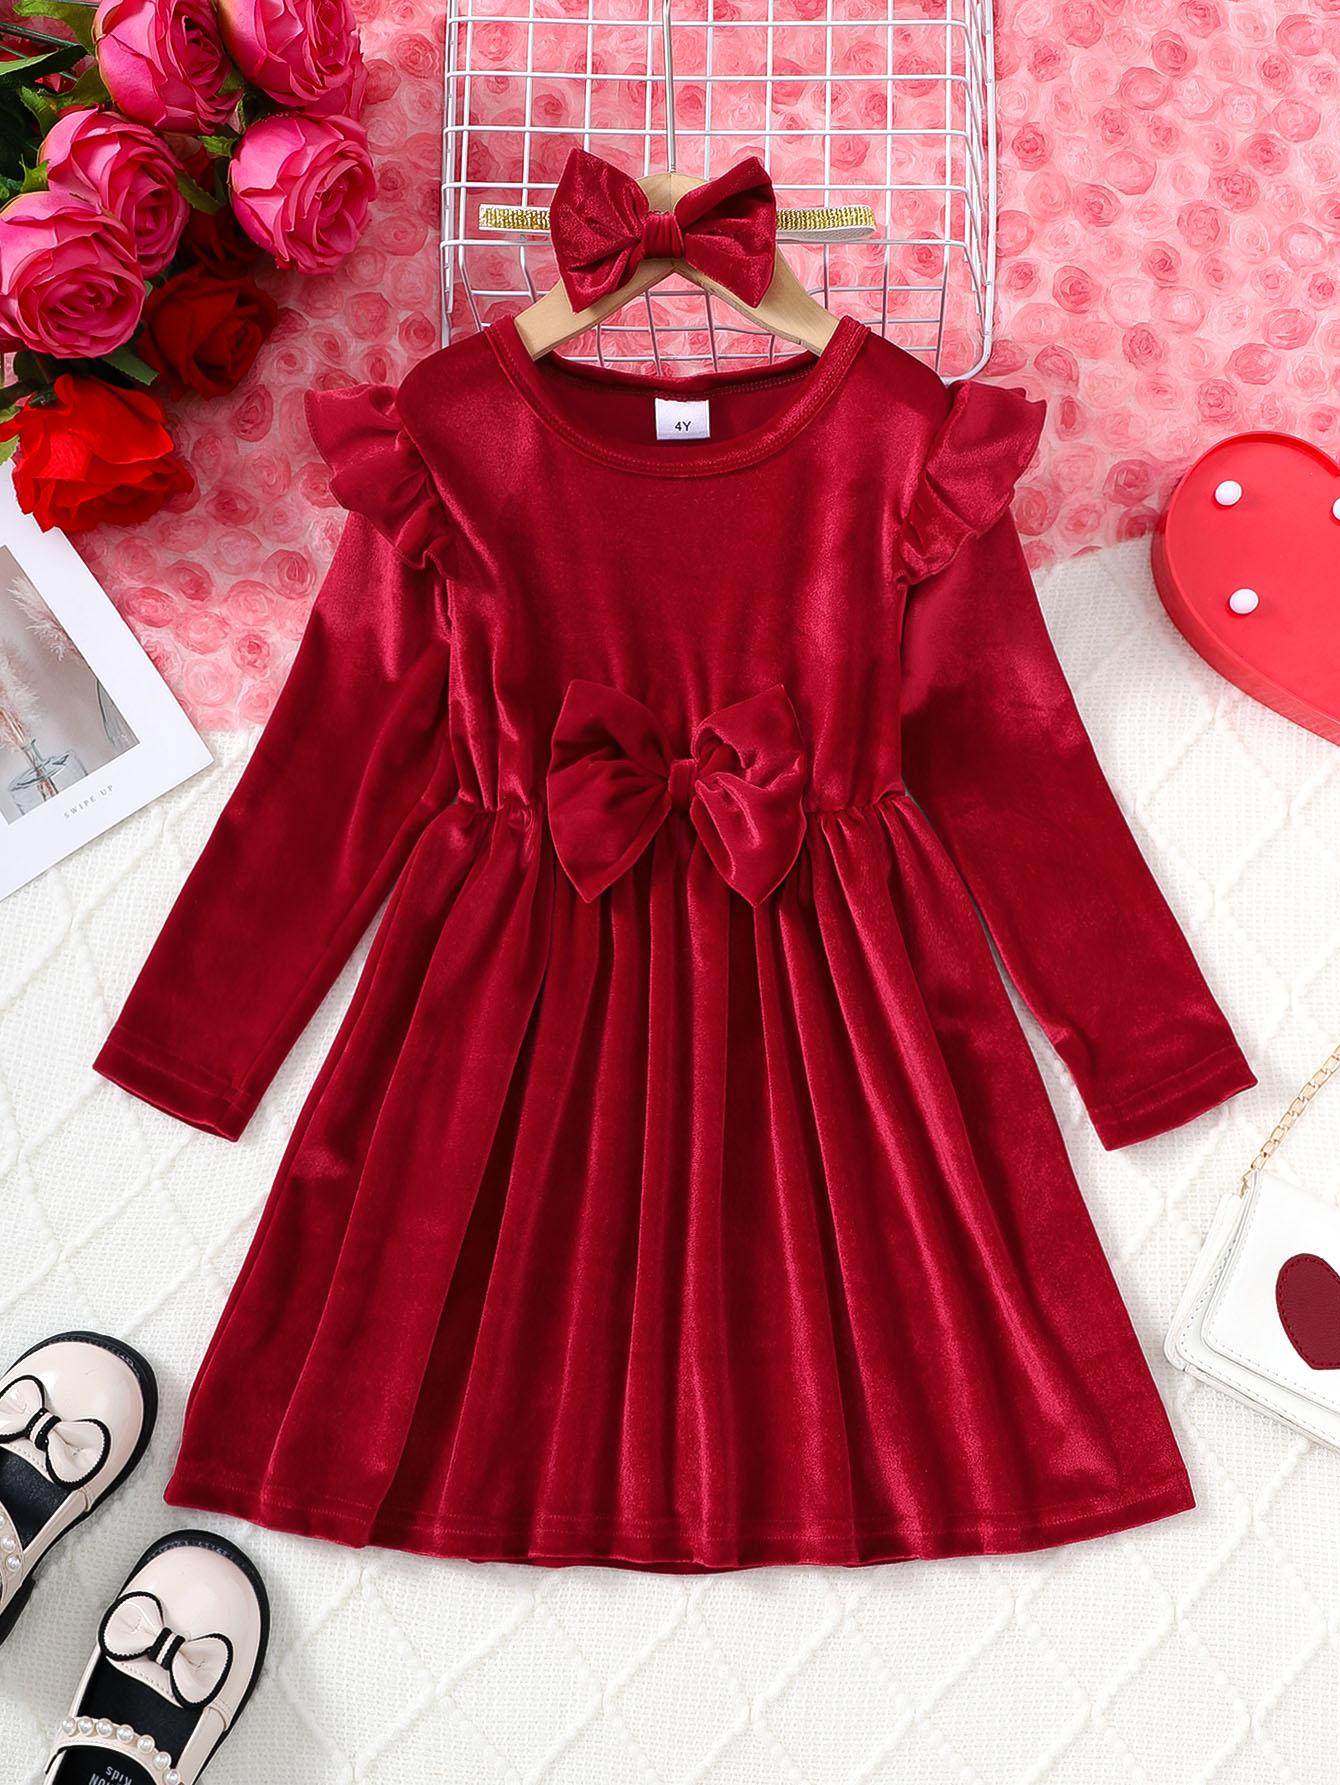 4-6Y Ready Stock 4-6y Toddler Girl's 2pcs Plain Bow Decor Ruffle Trim Long Sleeve Dress & Hair Band Set,Cute Romantic Kids Fall Winter Outfits Red Catpapa 462311005